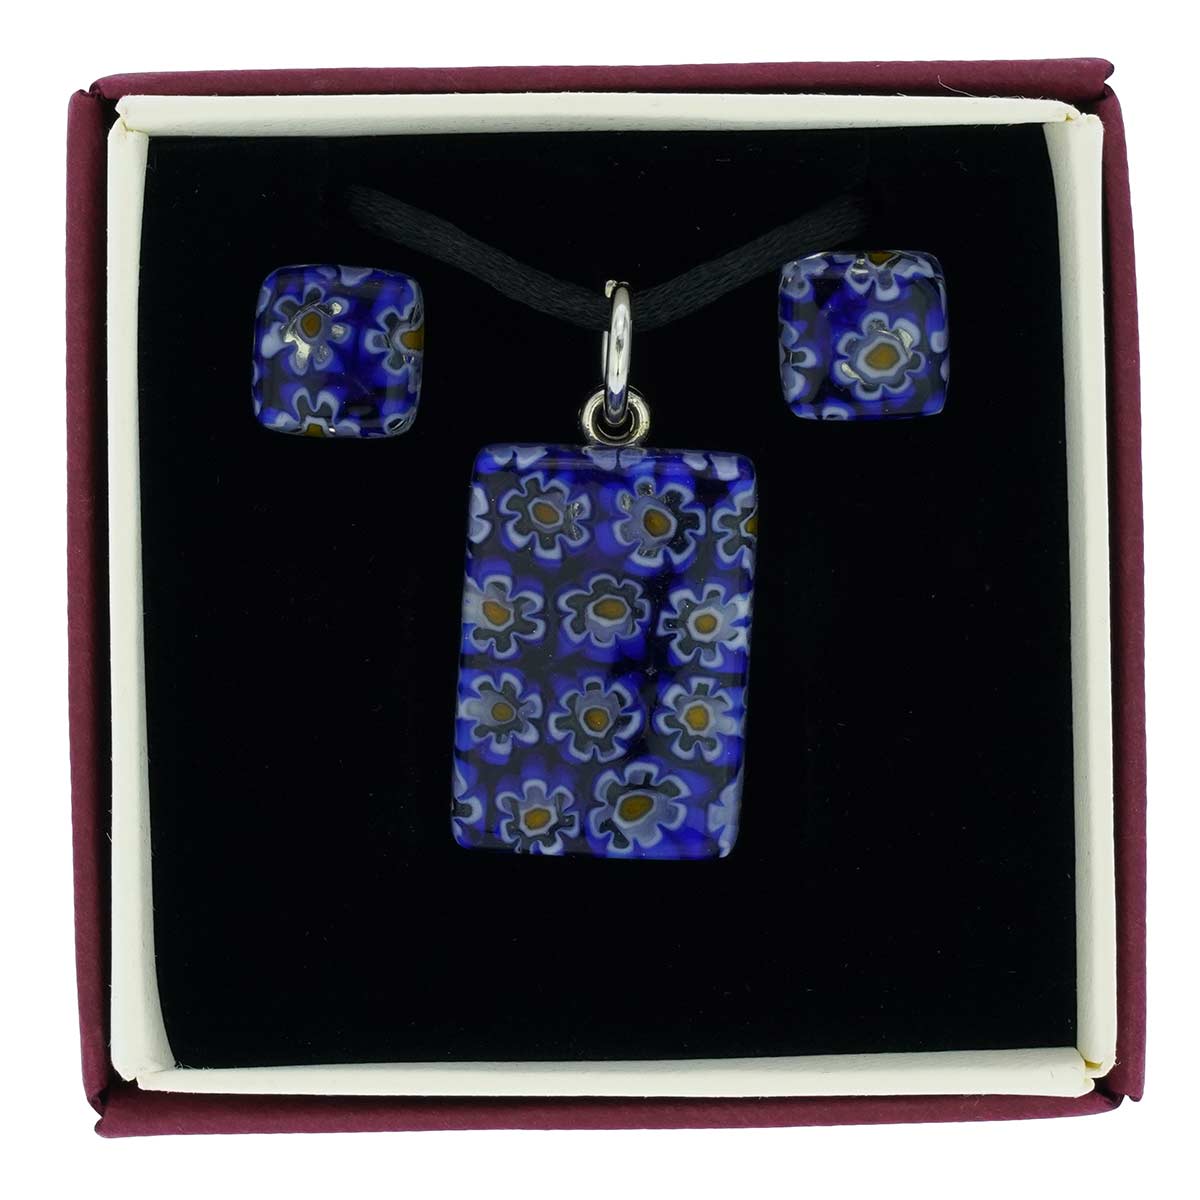 Murano Glass Cobalt Lola Collection Set Necklace and Earrings 